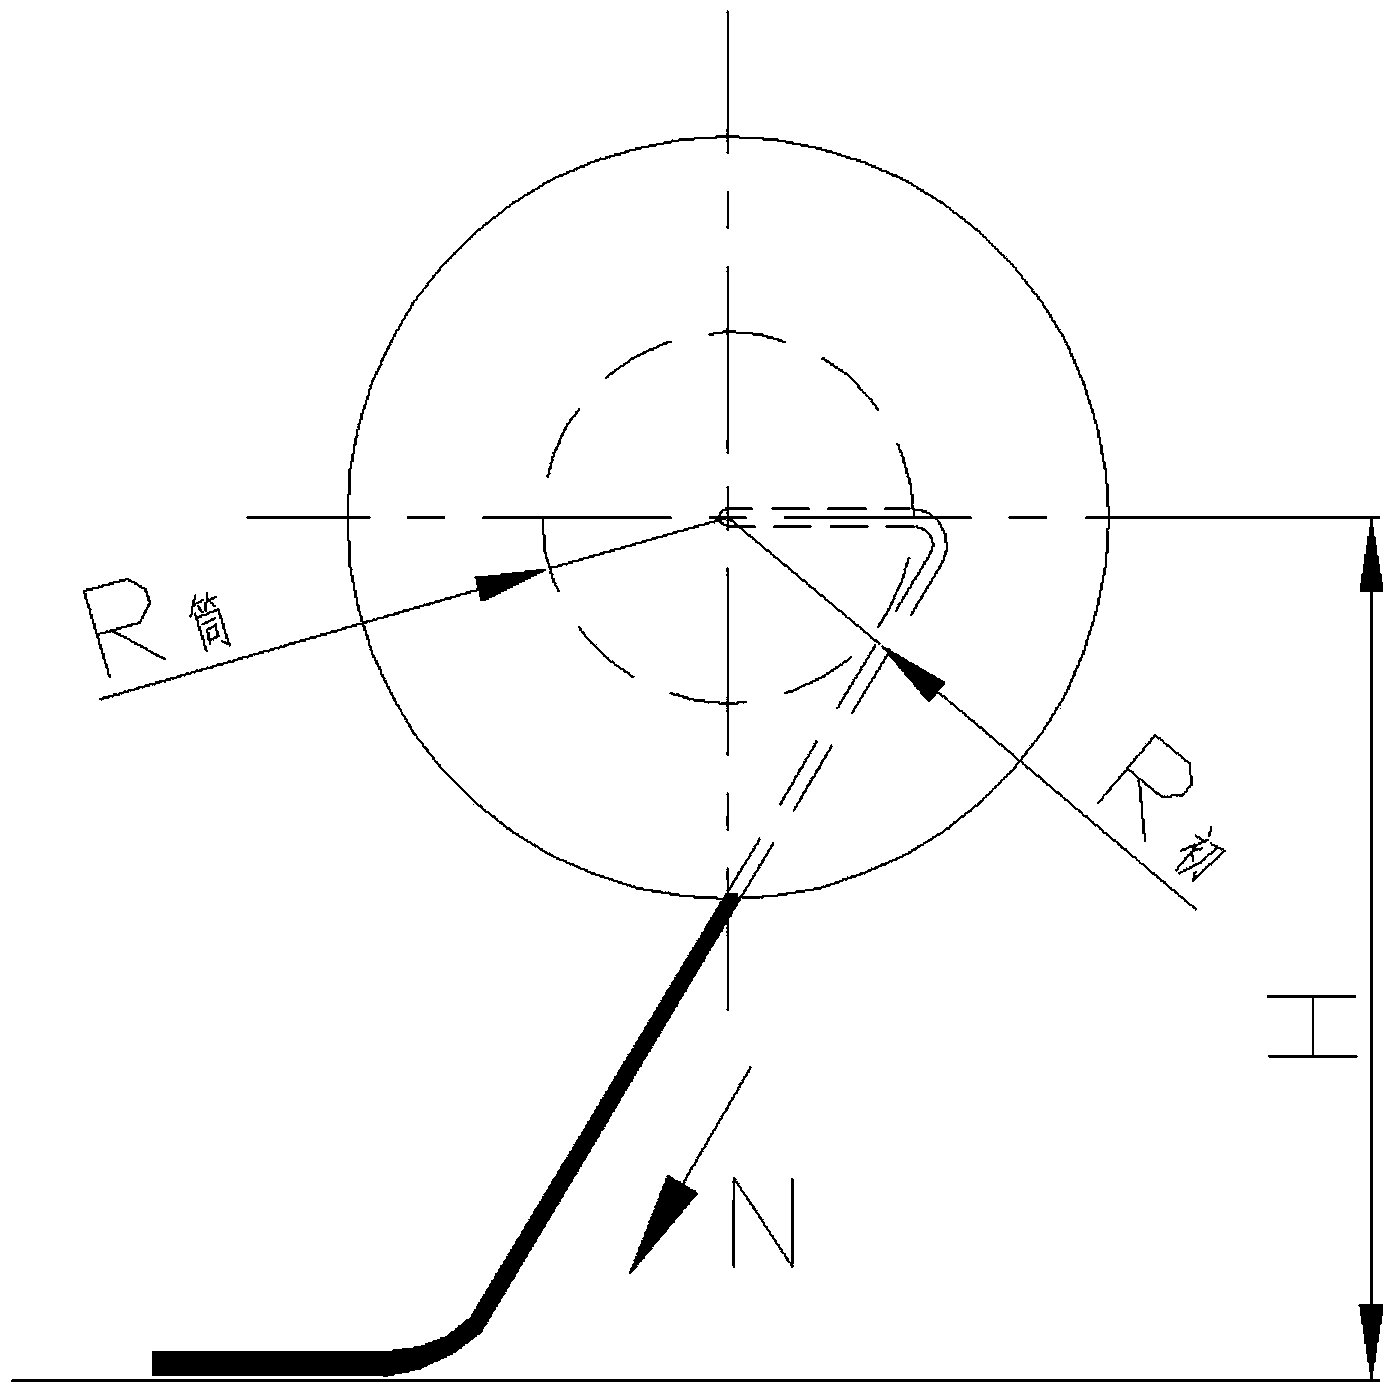 Constant-tension type cable drum device capable of flexibly winding cable